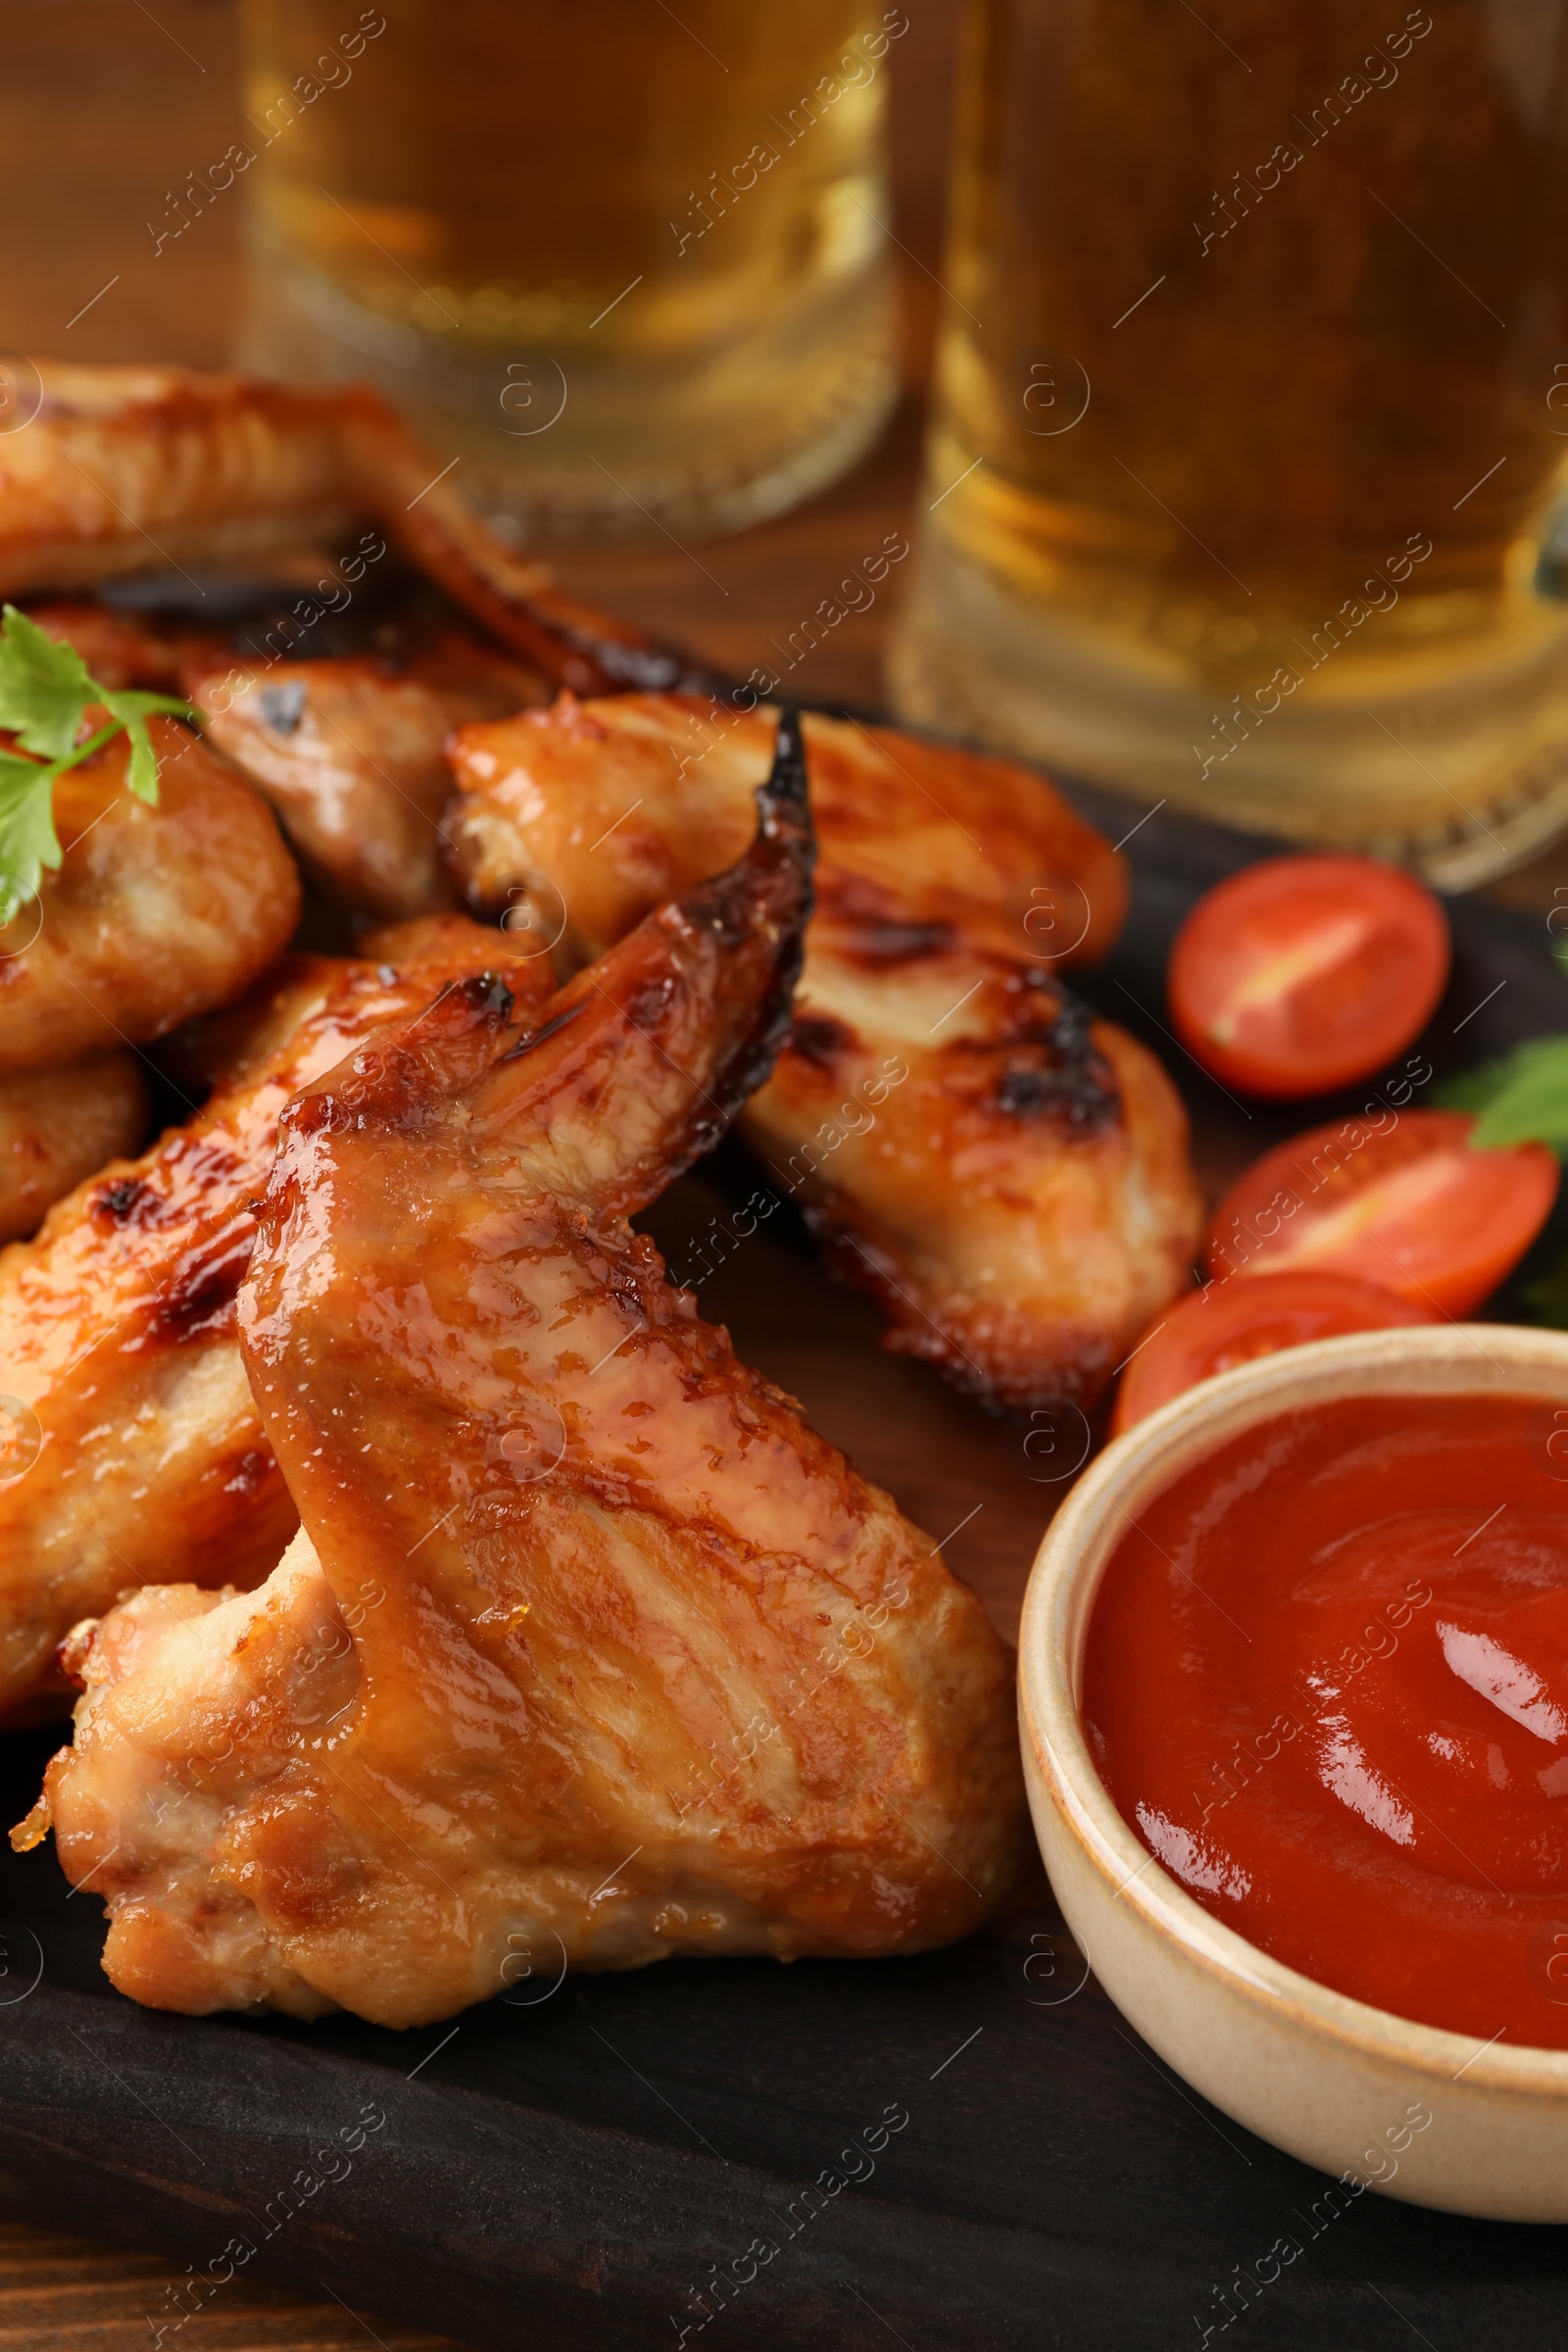 Photo of Delicious baked chicken wings, sauce and mugs with beer on table, closeup